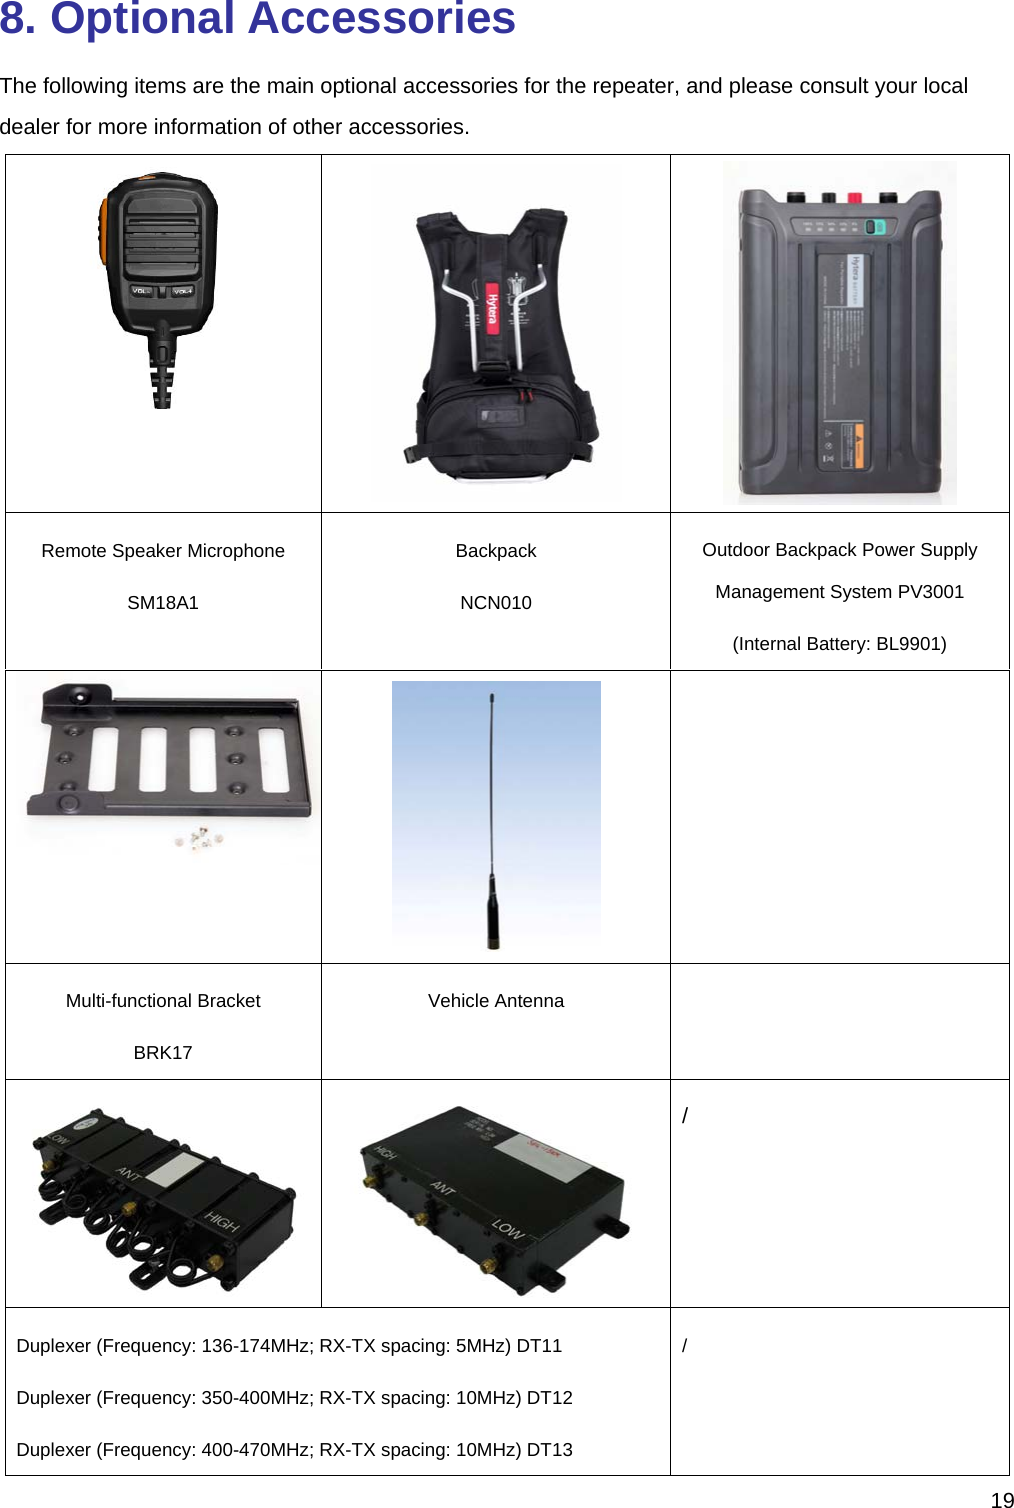  198. Optional Accessories The following items are the main optional accessories for the repeater, and please consult your local dealer for more information of other accessories.      Remote Speaker Microphone   SM18A1 Backpack NCN010 Outdoor Backpack Power Supply Management System PV3001 (Internal Battery: BL9901)   Multi-functional Bracket BRK17 Vehicle Antenna   / Duplexer (Frequency: 136-174MHz; RX-TX spacing: 5MHz) DT11   Duplexer (Frequency: 350-400MHz; RX-TX spacing: 10MHz) DT12   Duplexer (Frequency: 400-470MHz; RX-TX spacing: 10MHz) DT13   / 